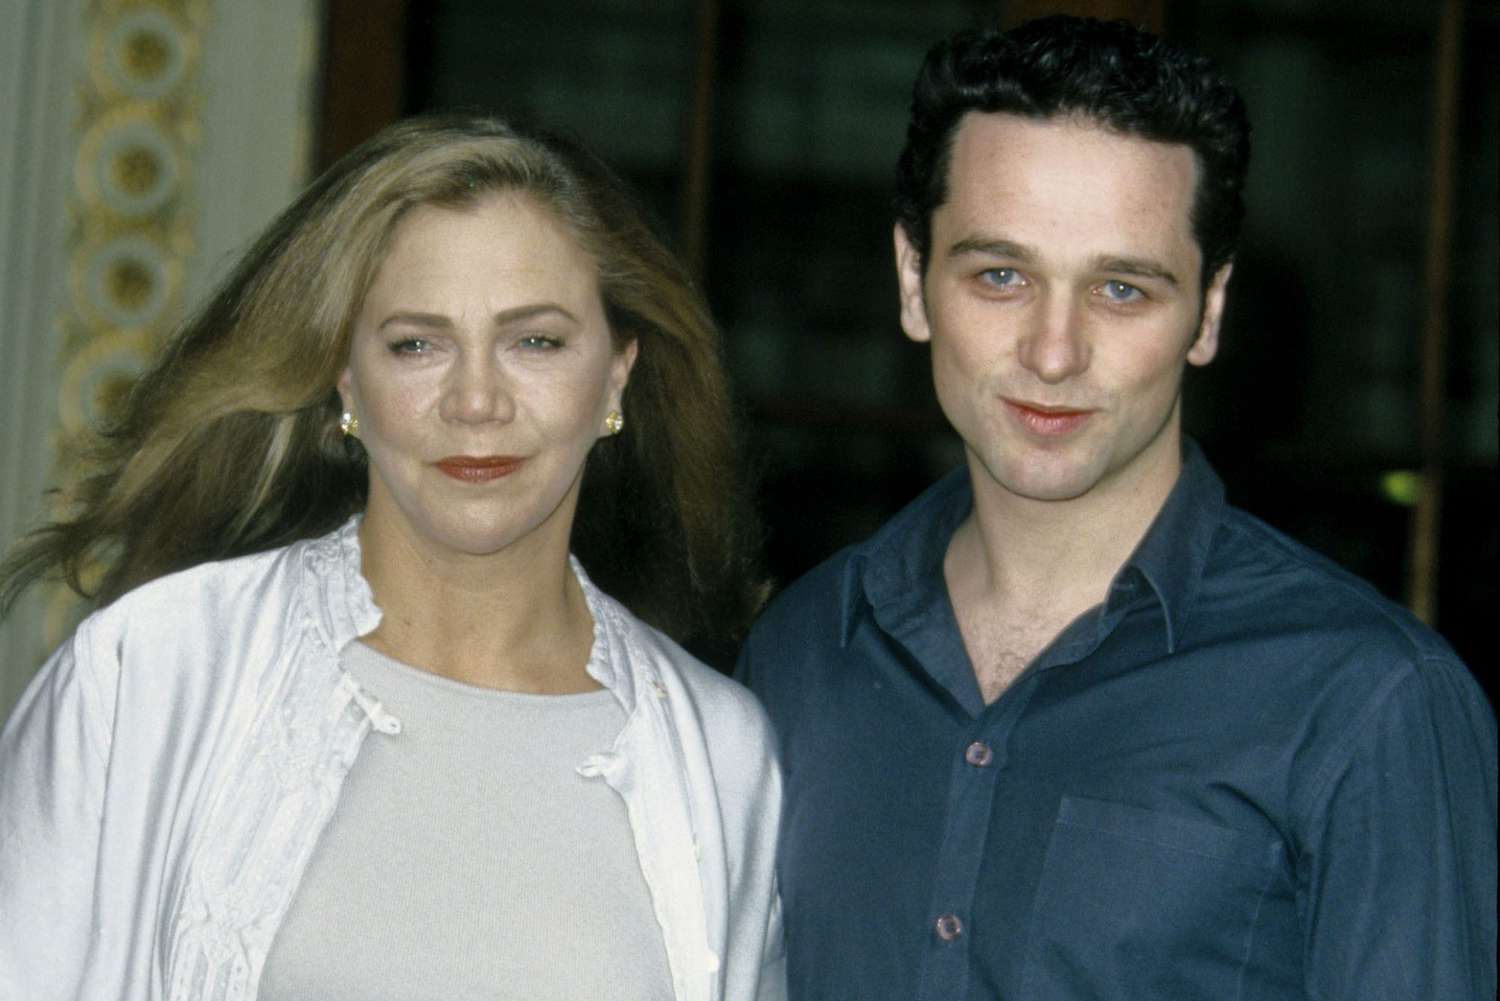 Kathleen Turner and Matthew Rhys during The Graduate Photocall at Guilad Theatre in London, Great Britain. (Photo by Fred Duval/FilmMagic)